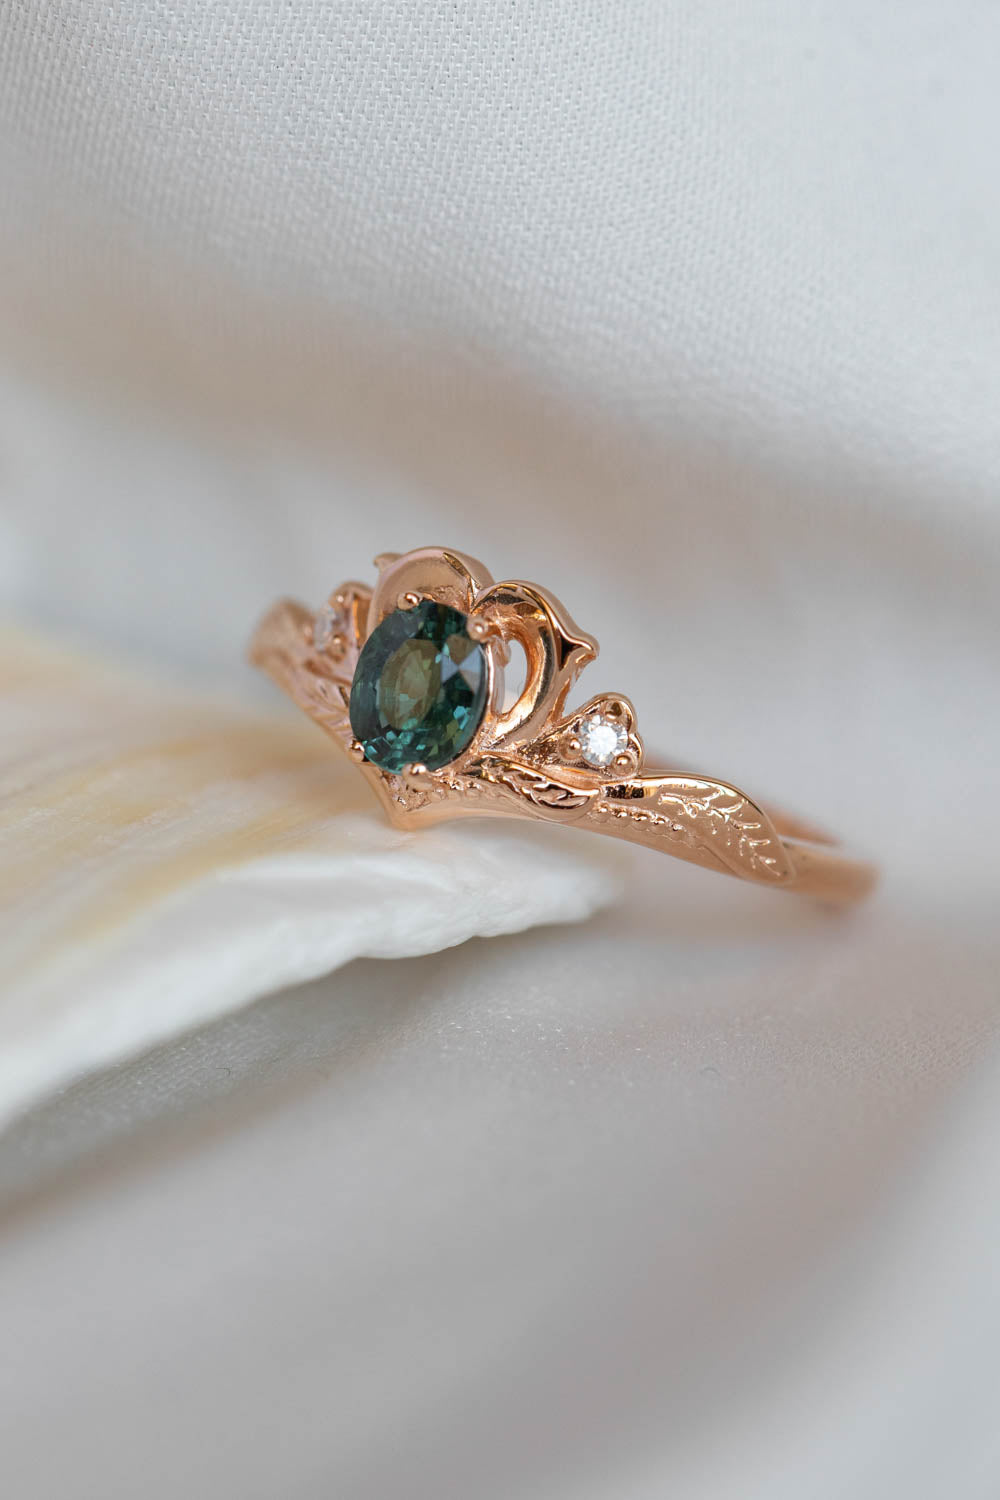 Genuine teal sapphire engagement ring, heart and diamond proposal ring / Amura - Eden Garden Jewelry™